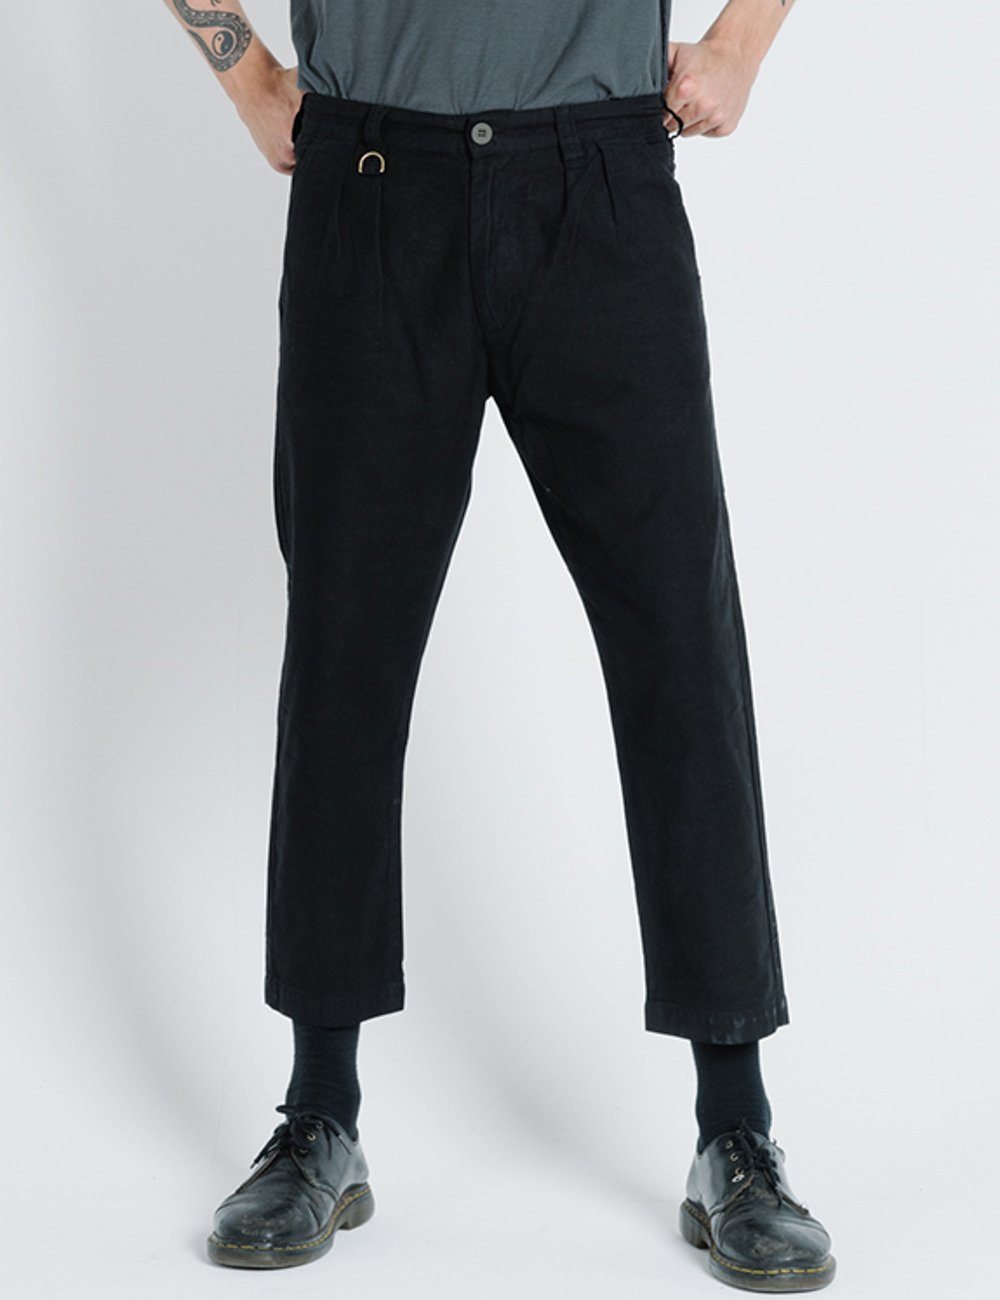 Division Pleated Military Pant - Black